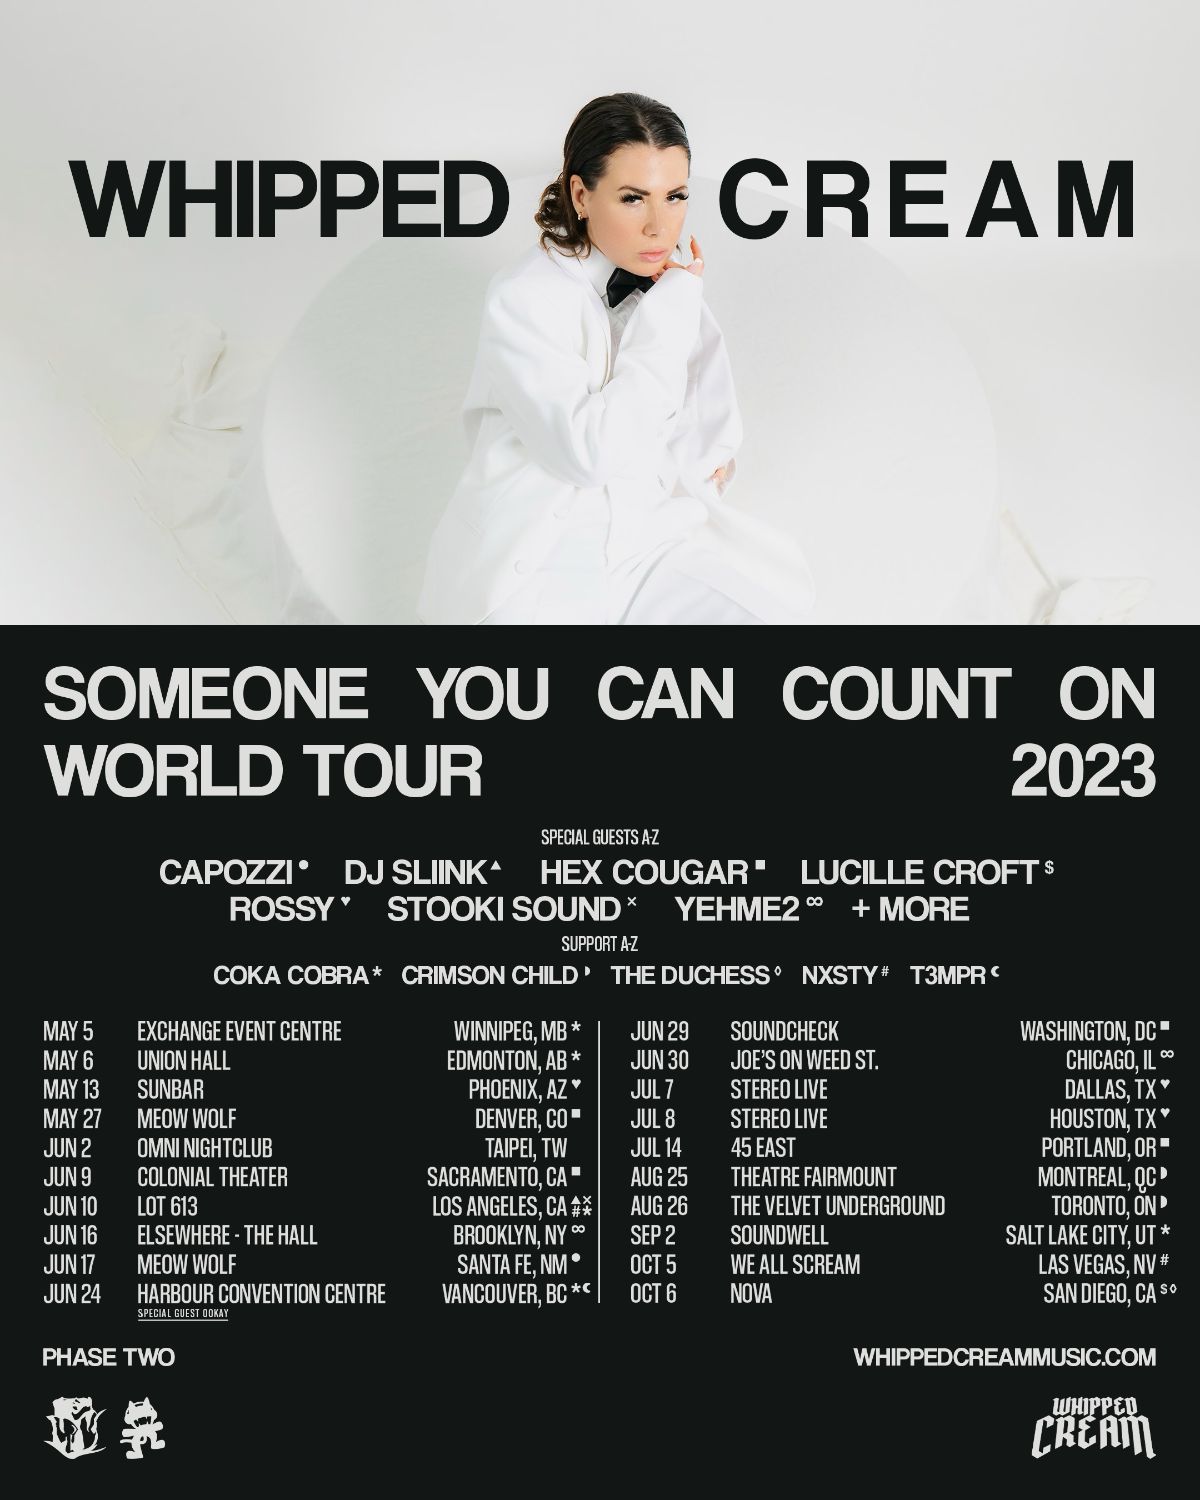 WHIPPED CREAM “Someone You Can Count On Tour” poster